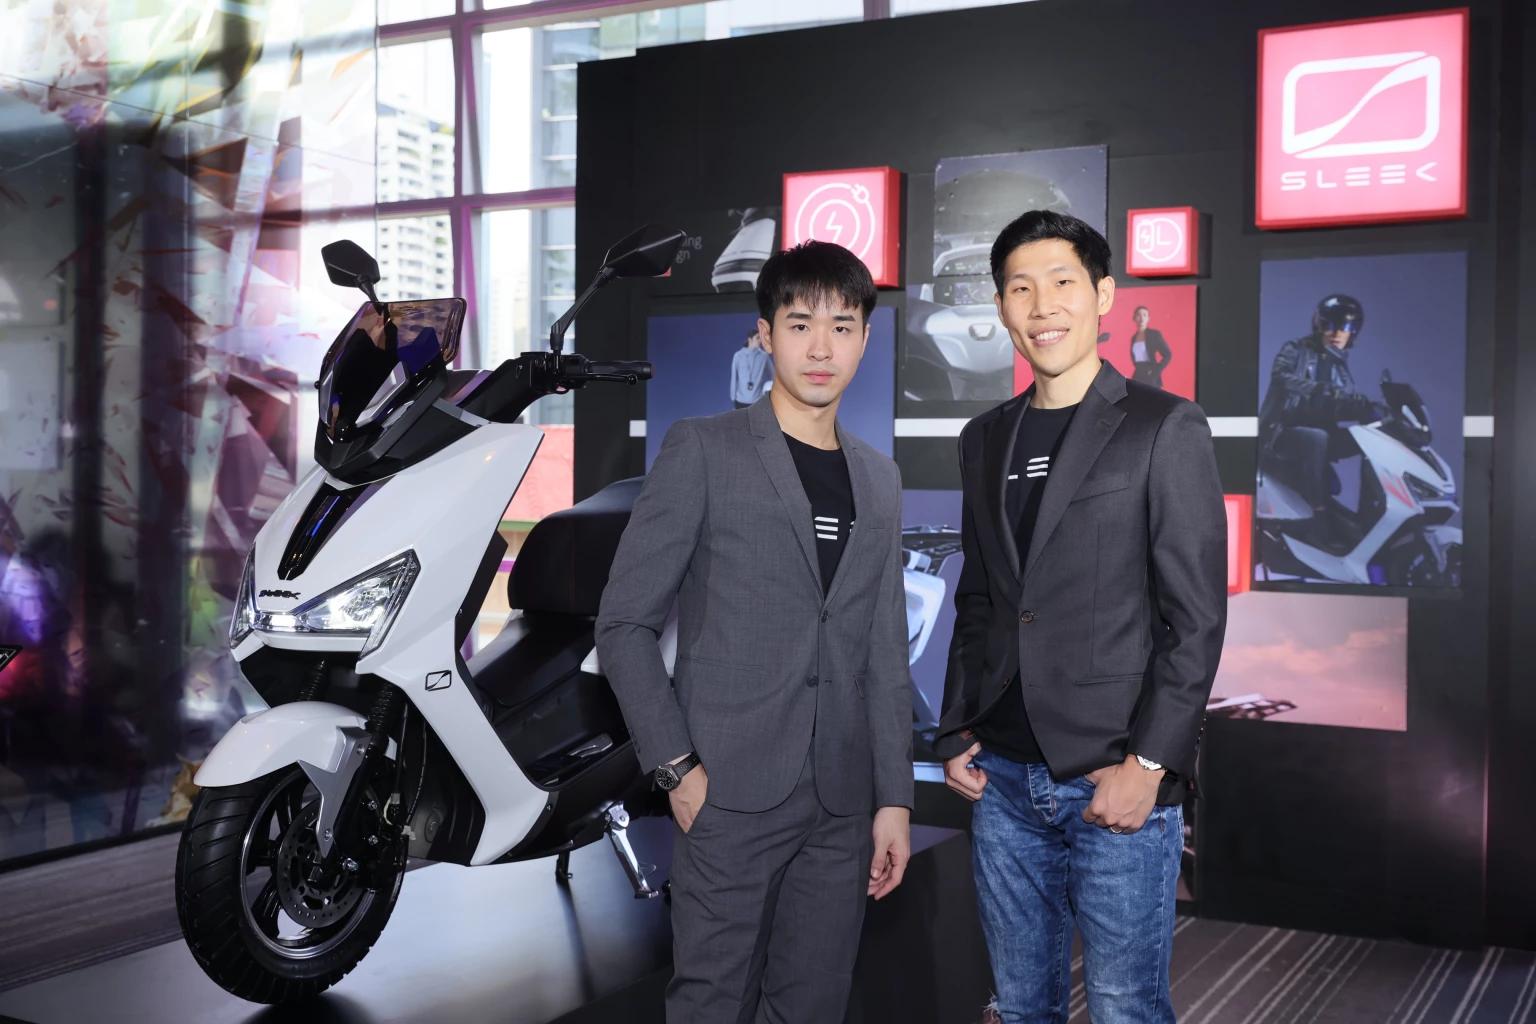 SLEEK EV officially debuts in Thailand, eyes having battery swapping stations nationwide in 2023